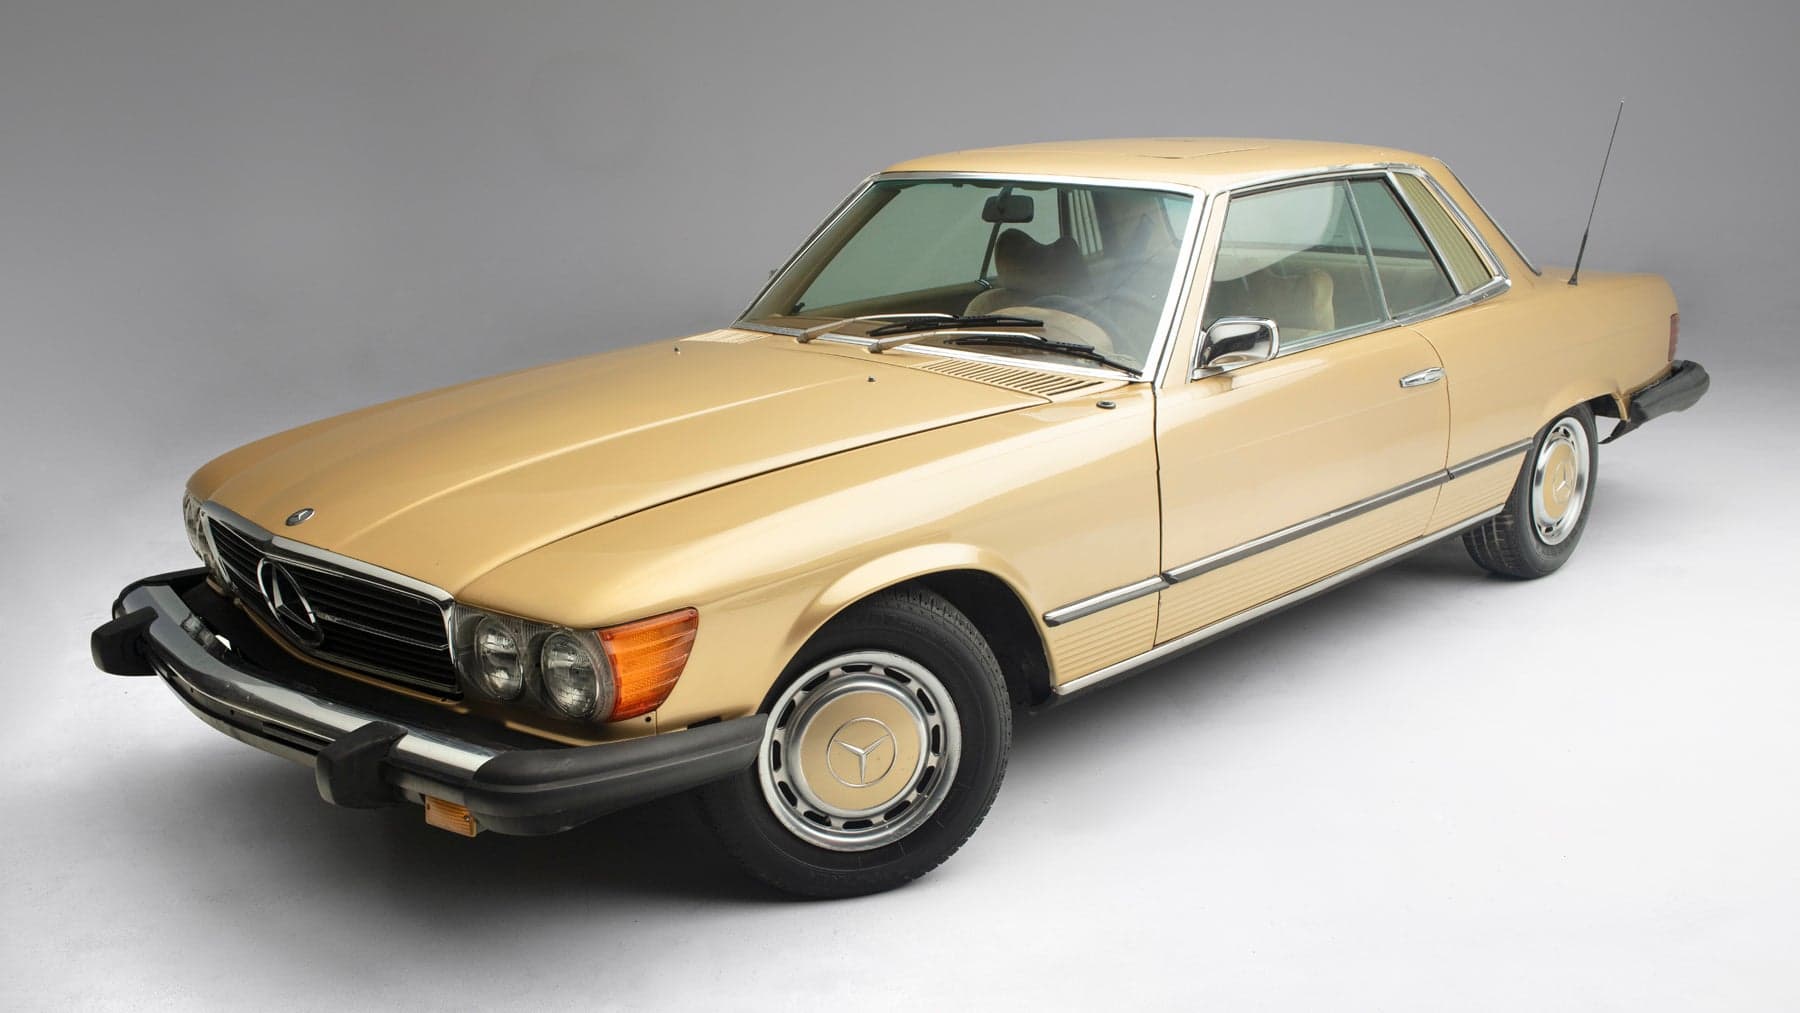 Elvis Presley’s 1974 Mercedes-Benz 450 SLC Expected to Fetch $200,000 at Auction